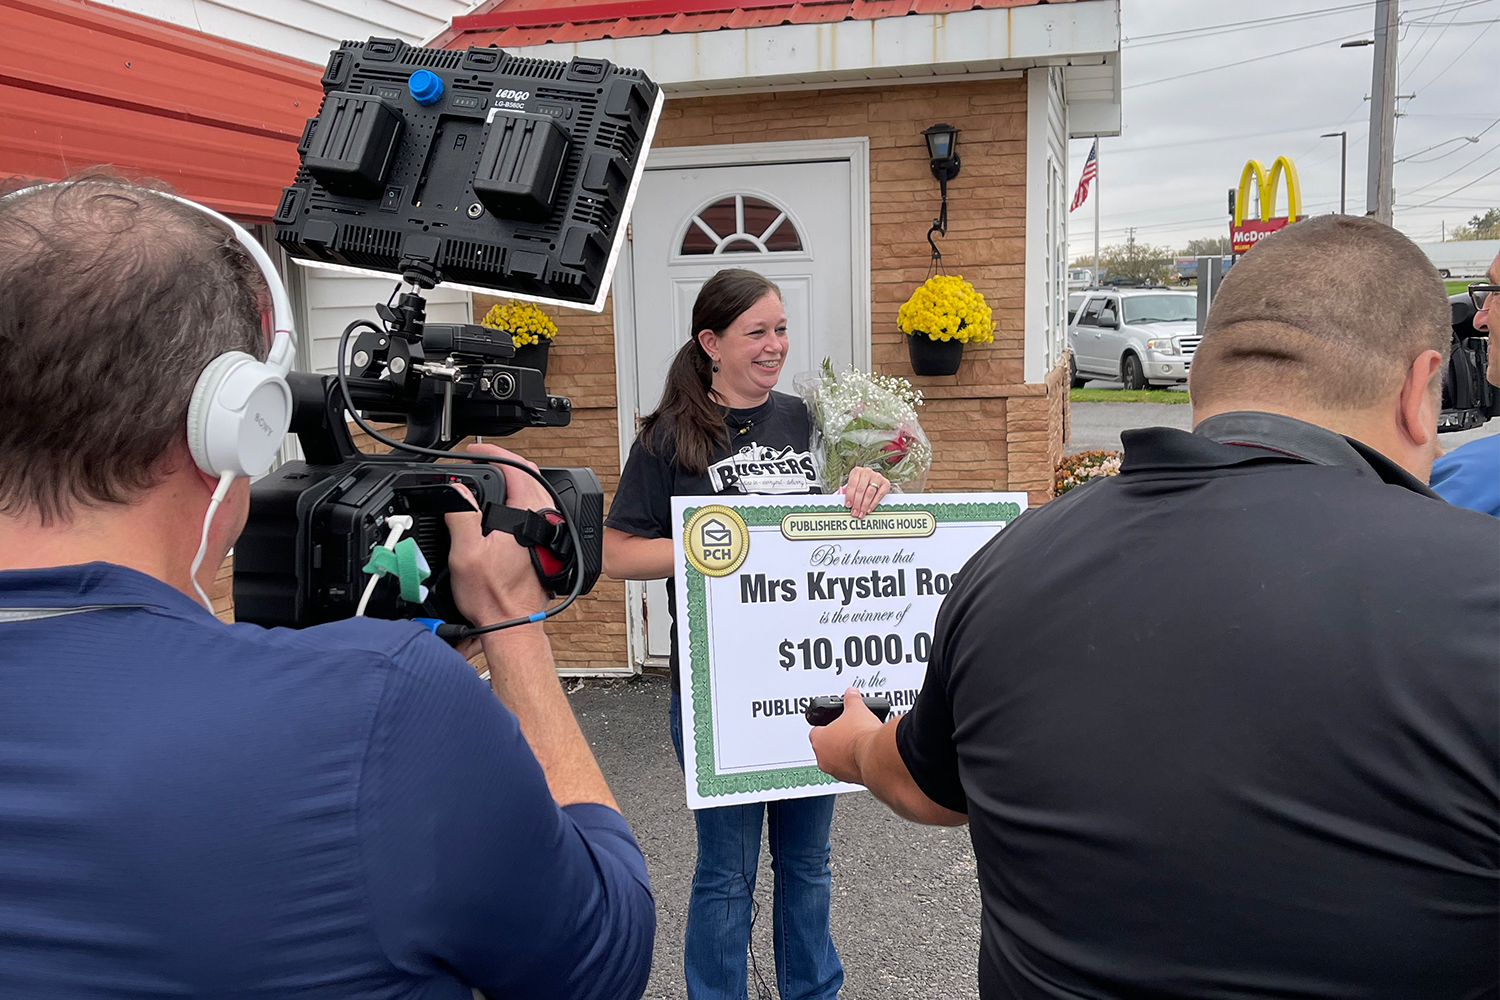 Krystal Rose, who worked at Busters in Ogdensburg, New York, standing in front of cameras and reports while holding a ceremonial check for $10,000 from Publishers Clearing House, presented to her by Prize Patrol member Howie Guja.